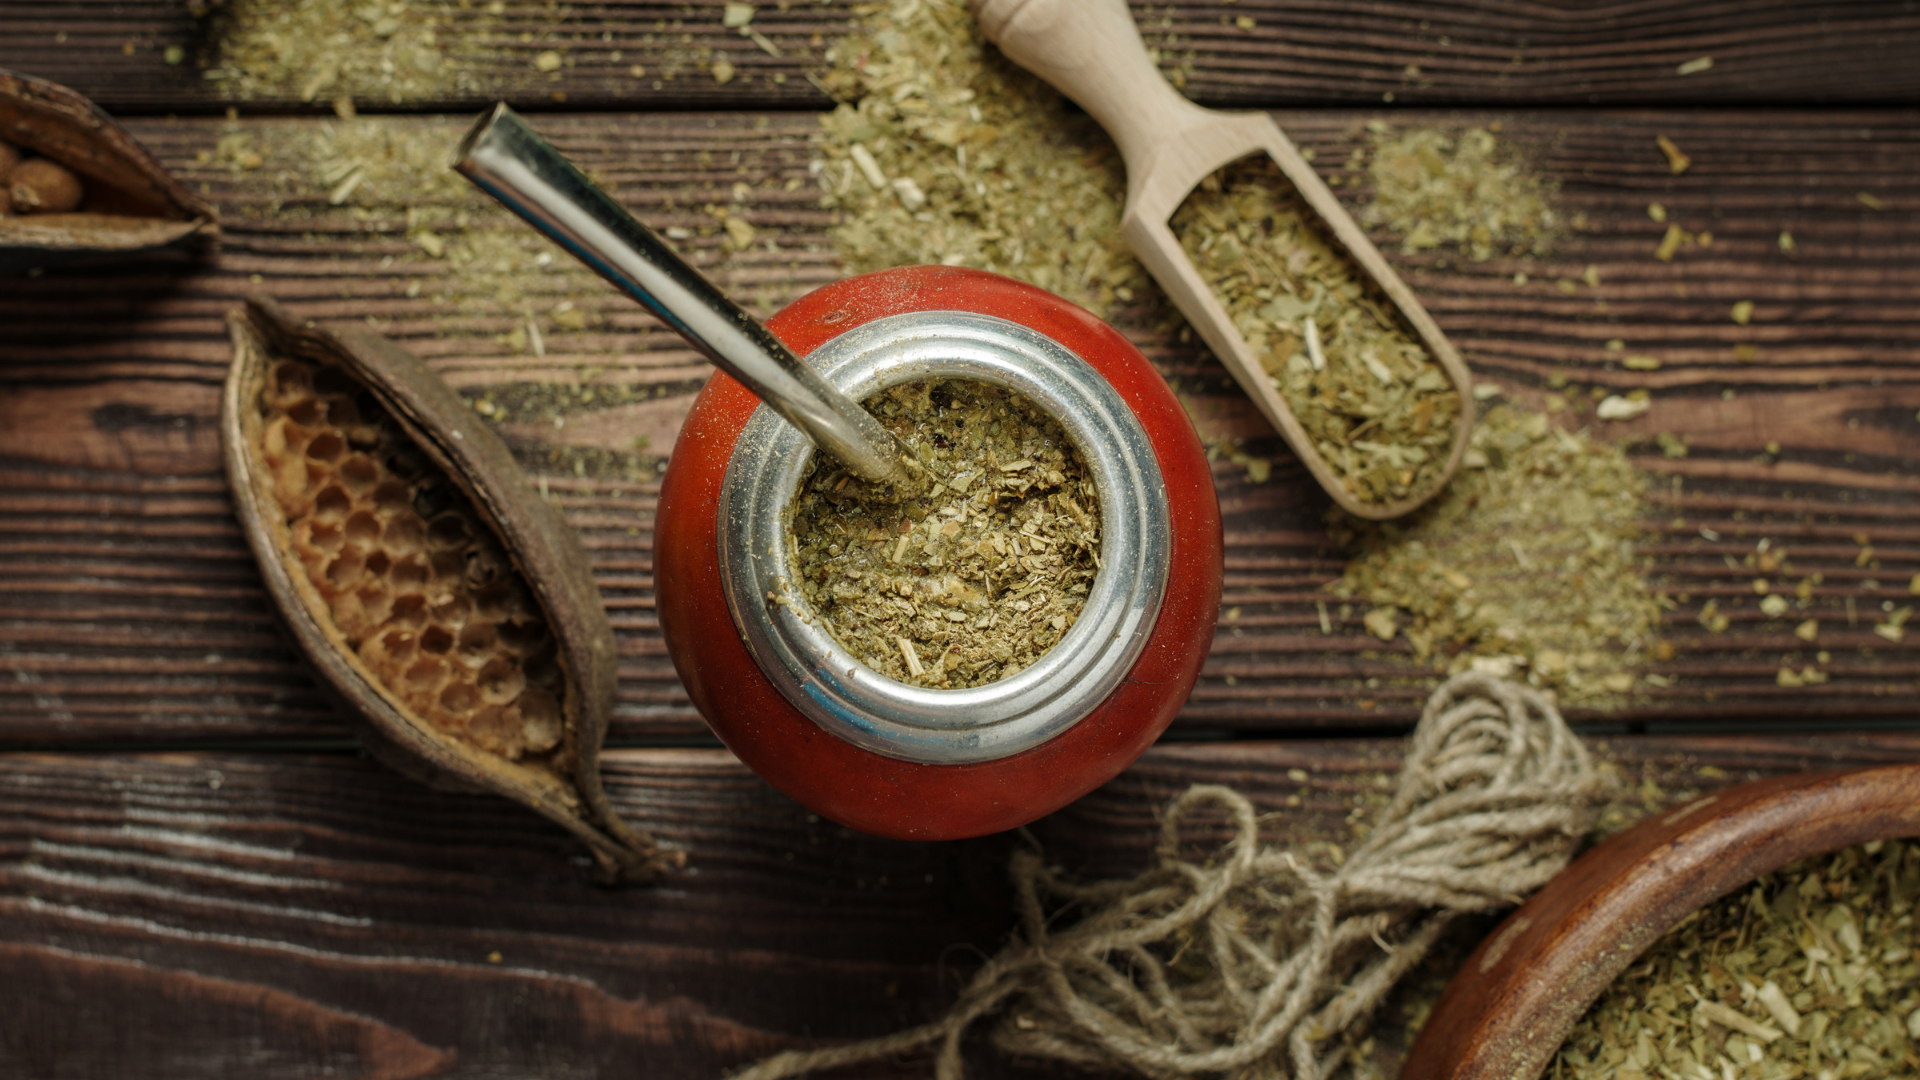 Yerba mate gourd with mate and bomilla on a wood plank background